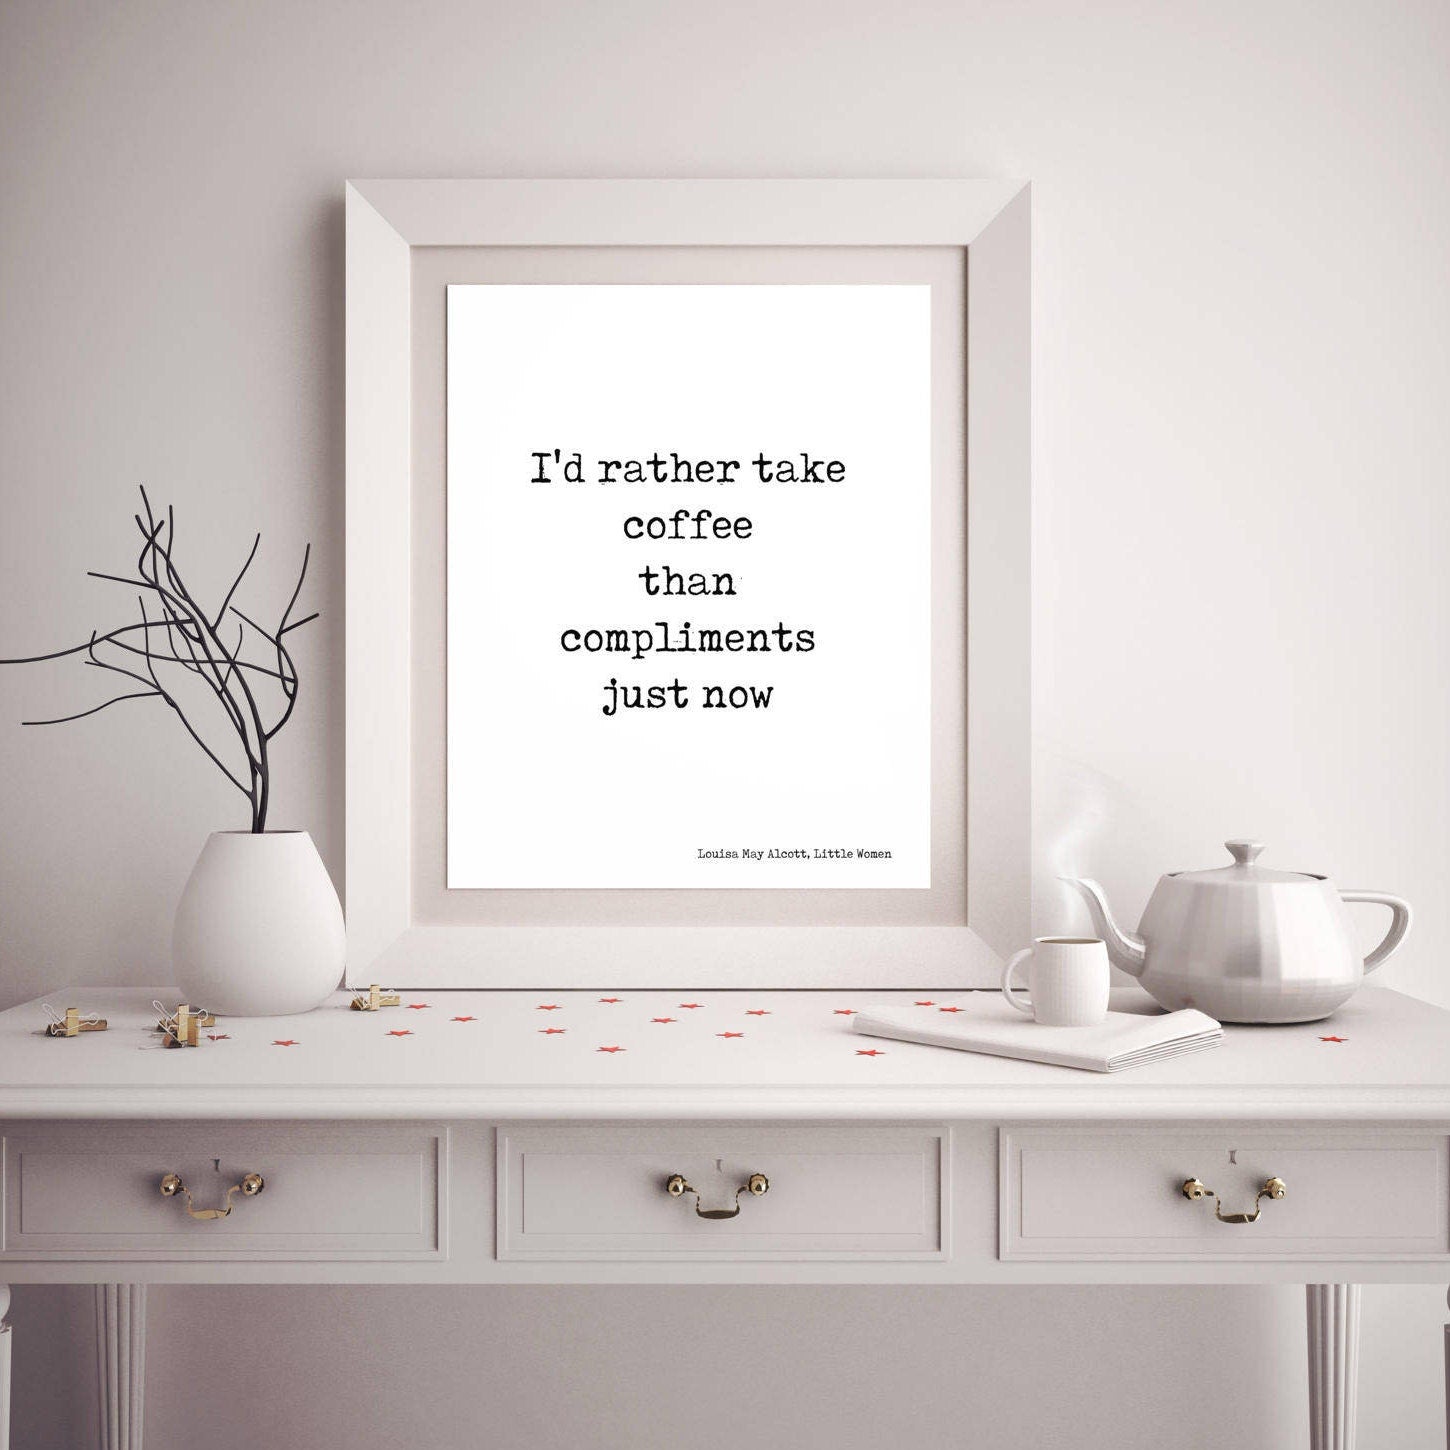 Little Women COFFEE Quote Wall Art Print, Coffee Decor for Kitchen LM Alcott Print